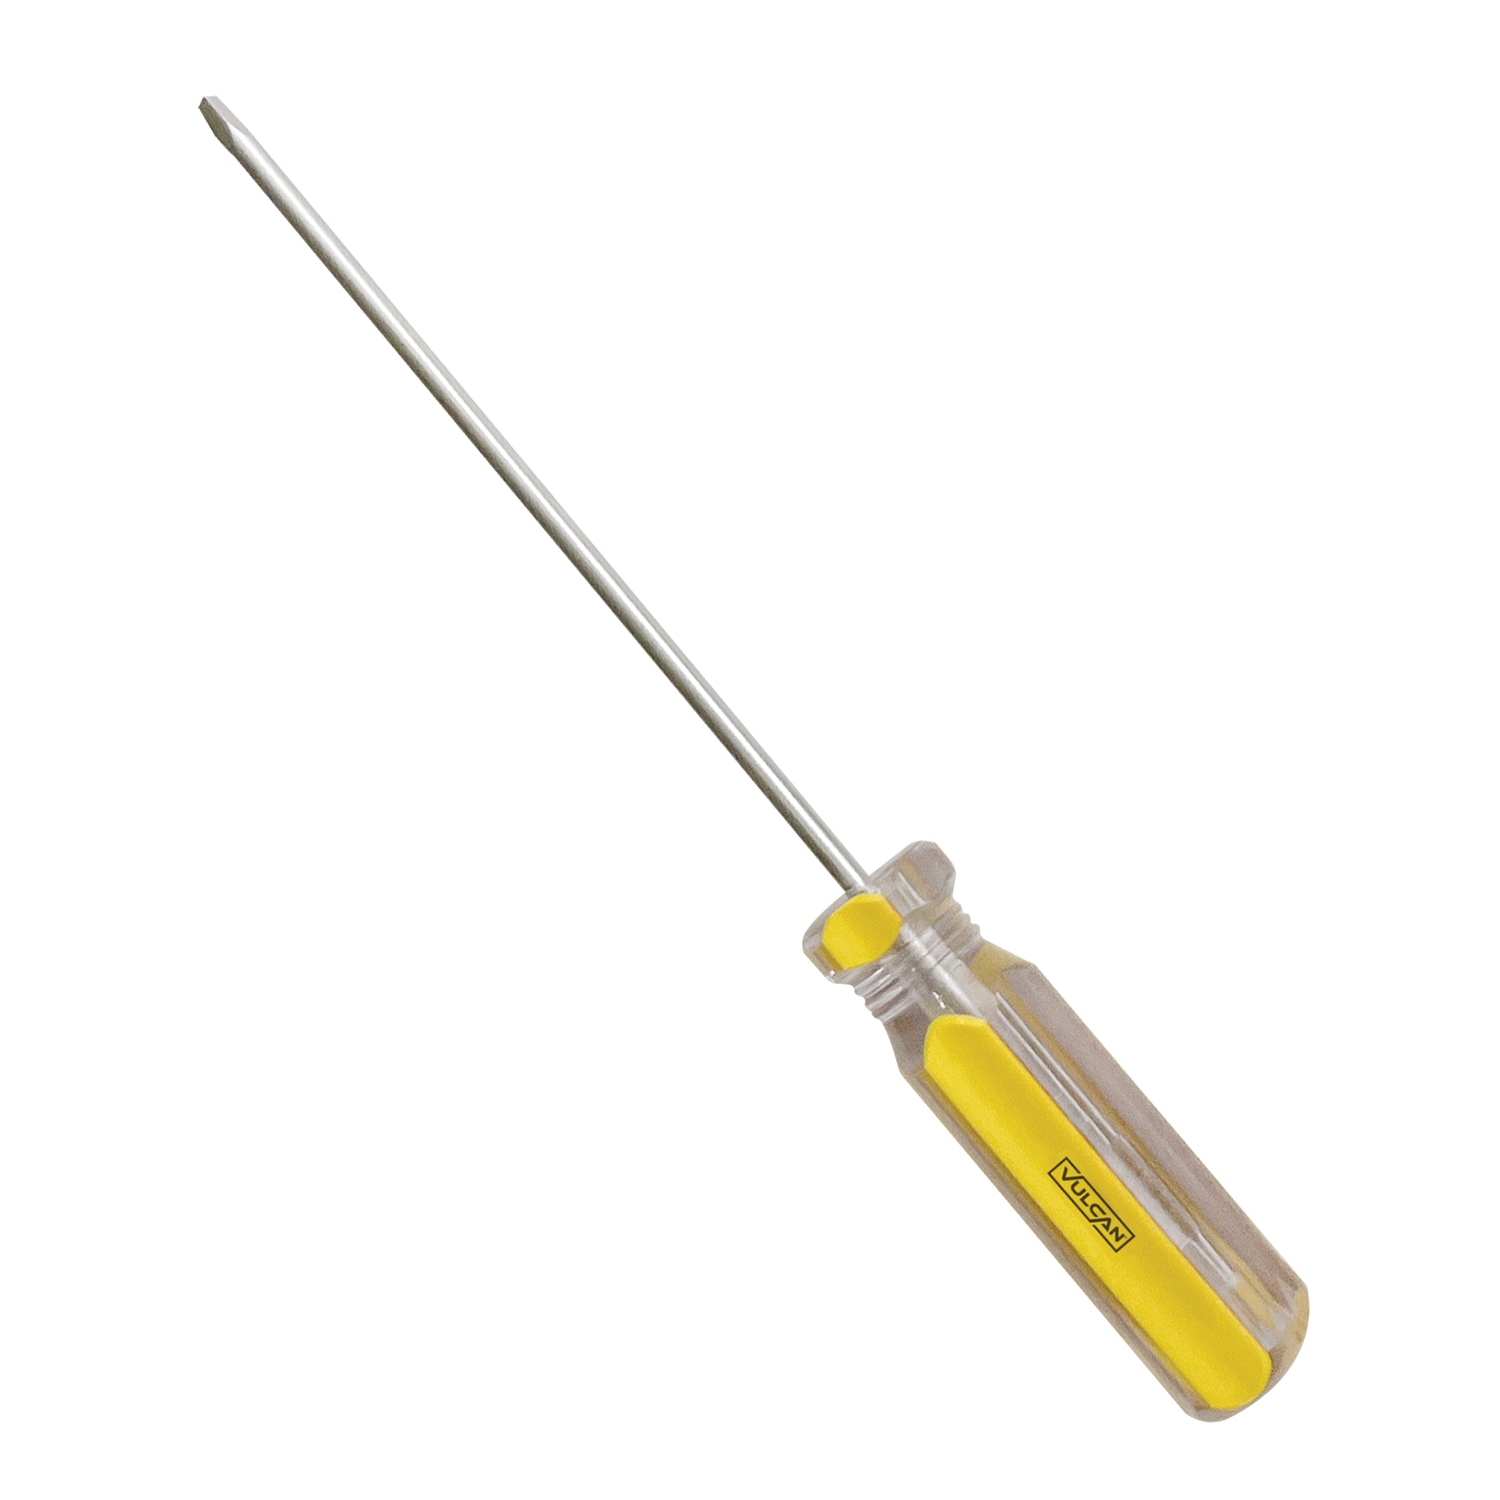 SQ04 Screwdriver, S0 Drive, Square Drive, 6-1/2 in OAL, 4 in L Shank, Plastic Handle, Transparent Handle